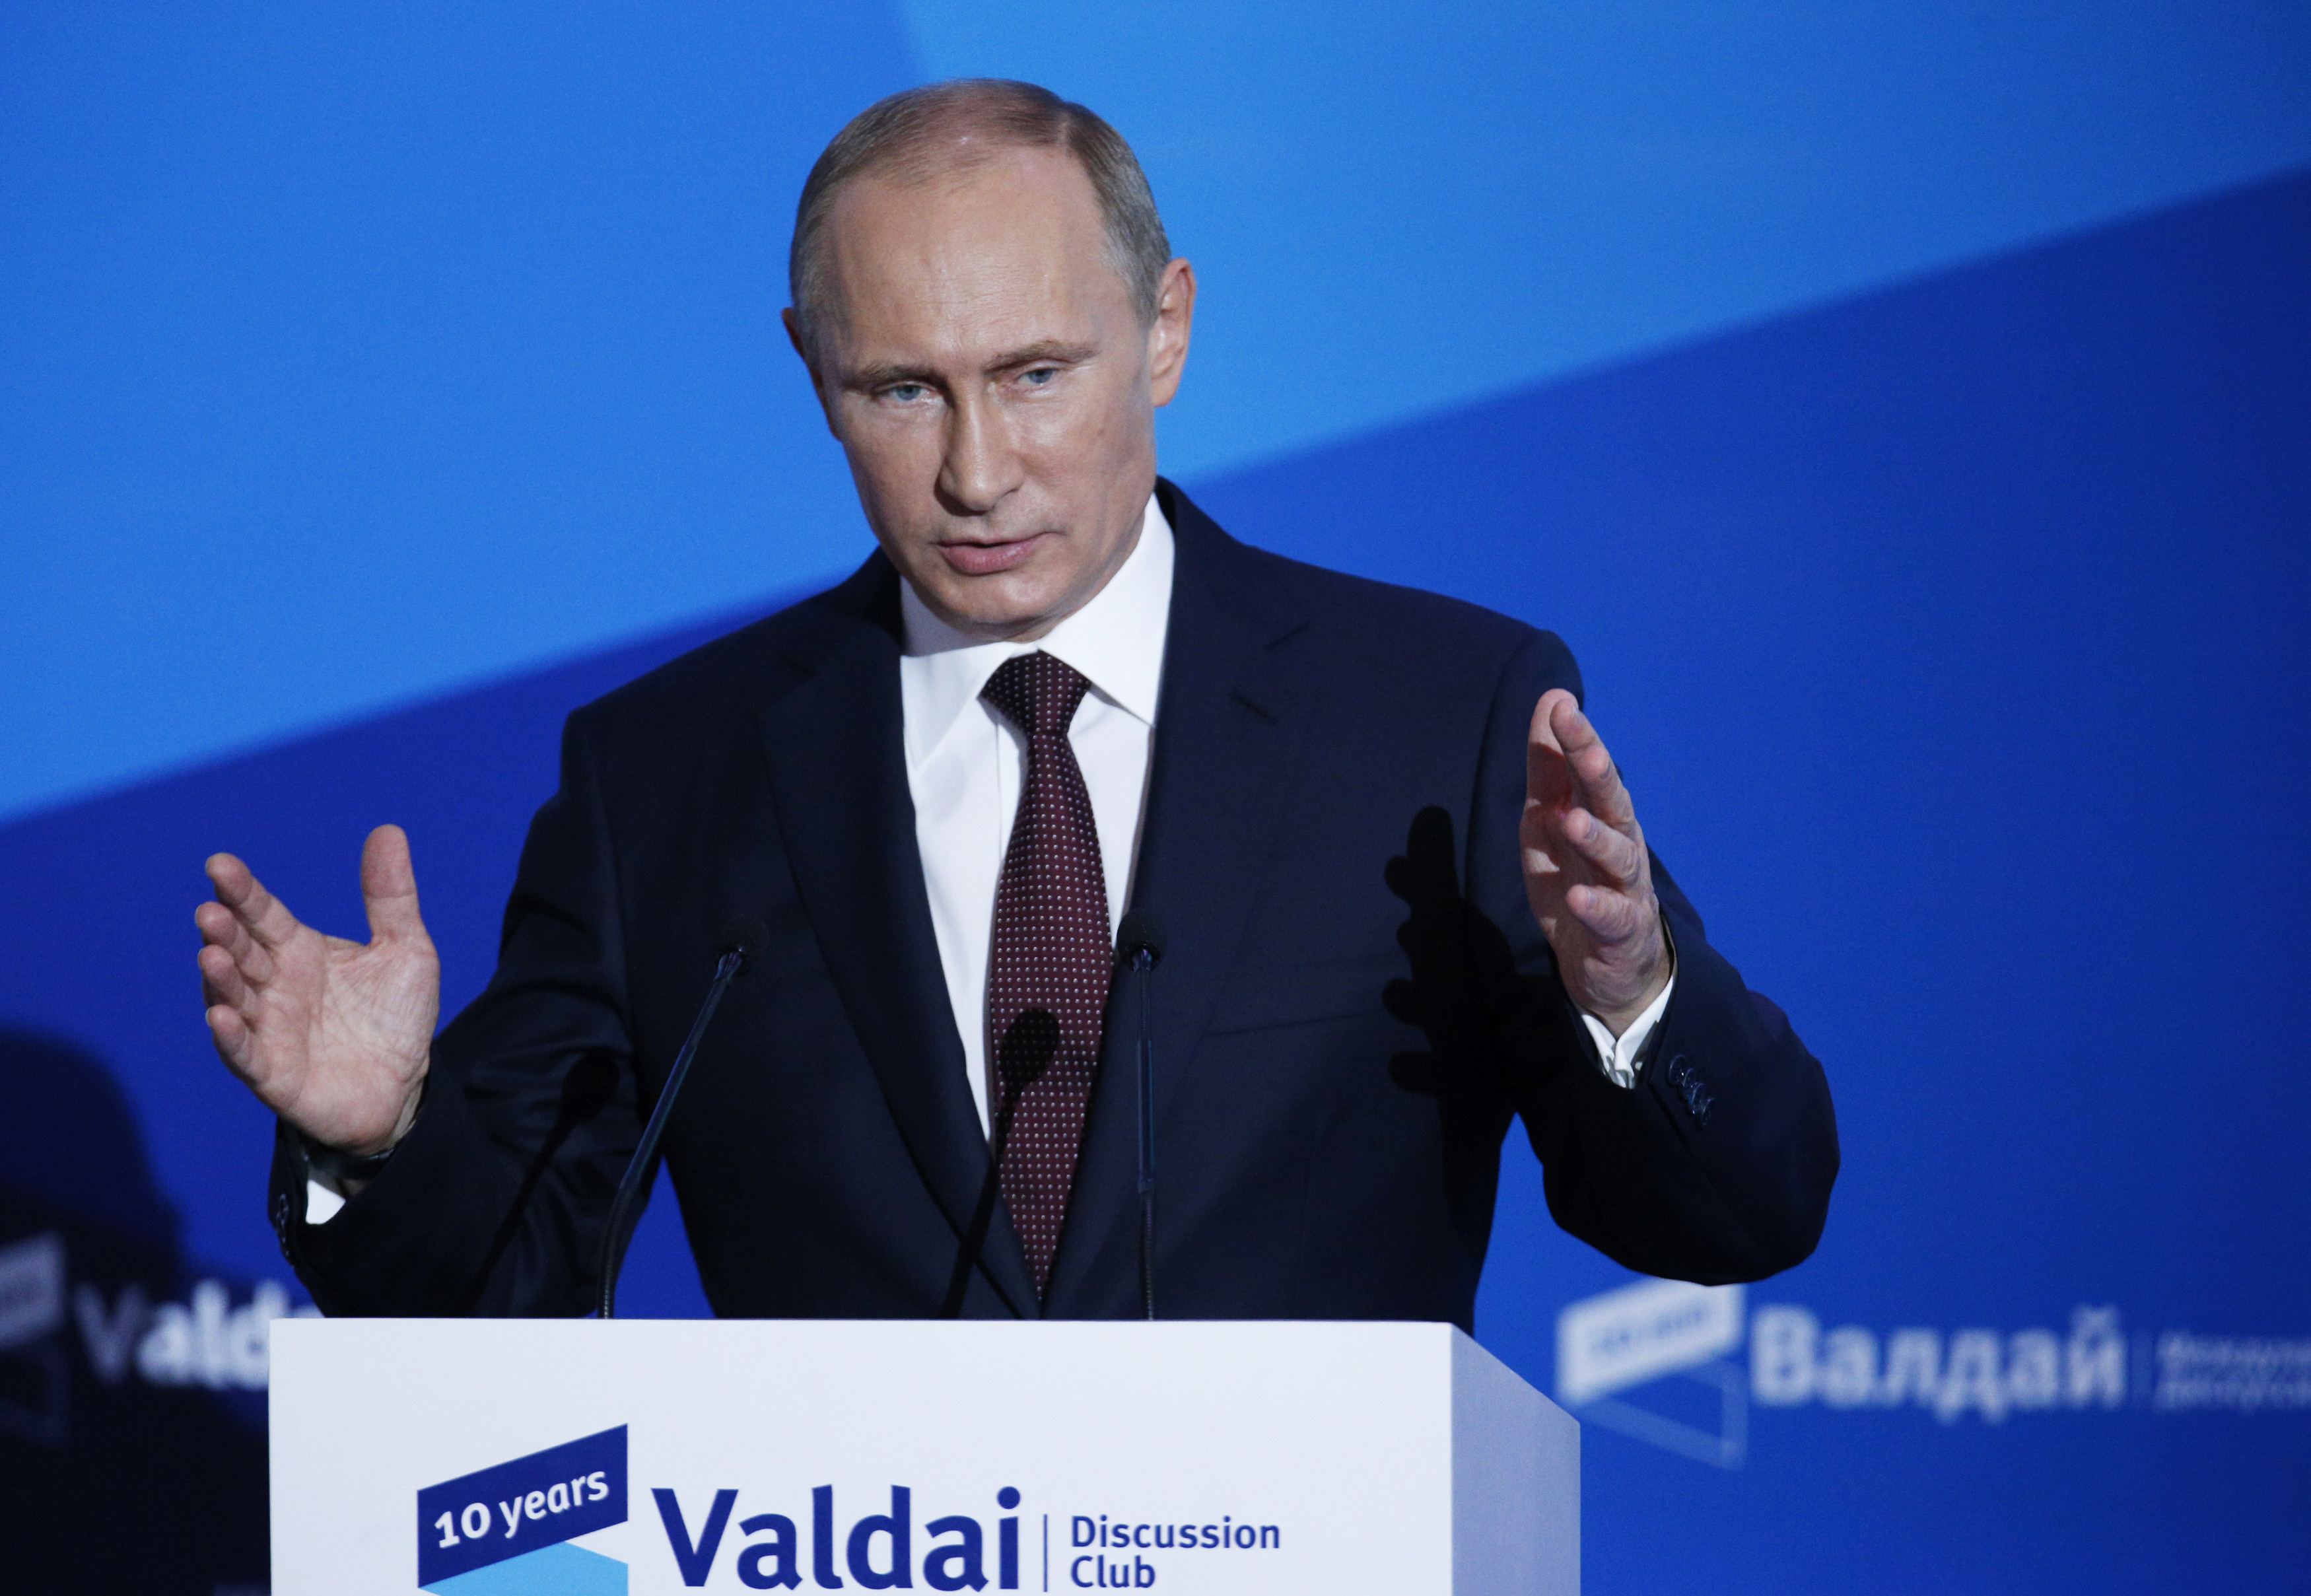 Putin says outside forces using radical Islam to 'weaken Russia'